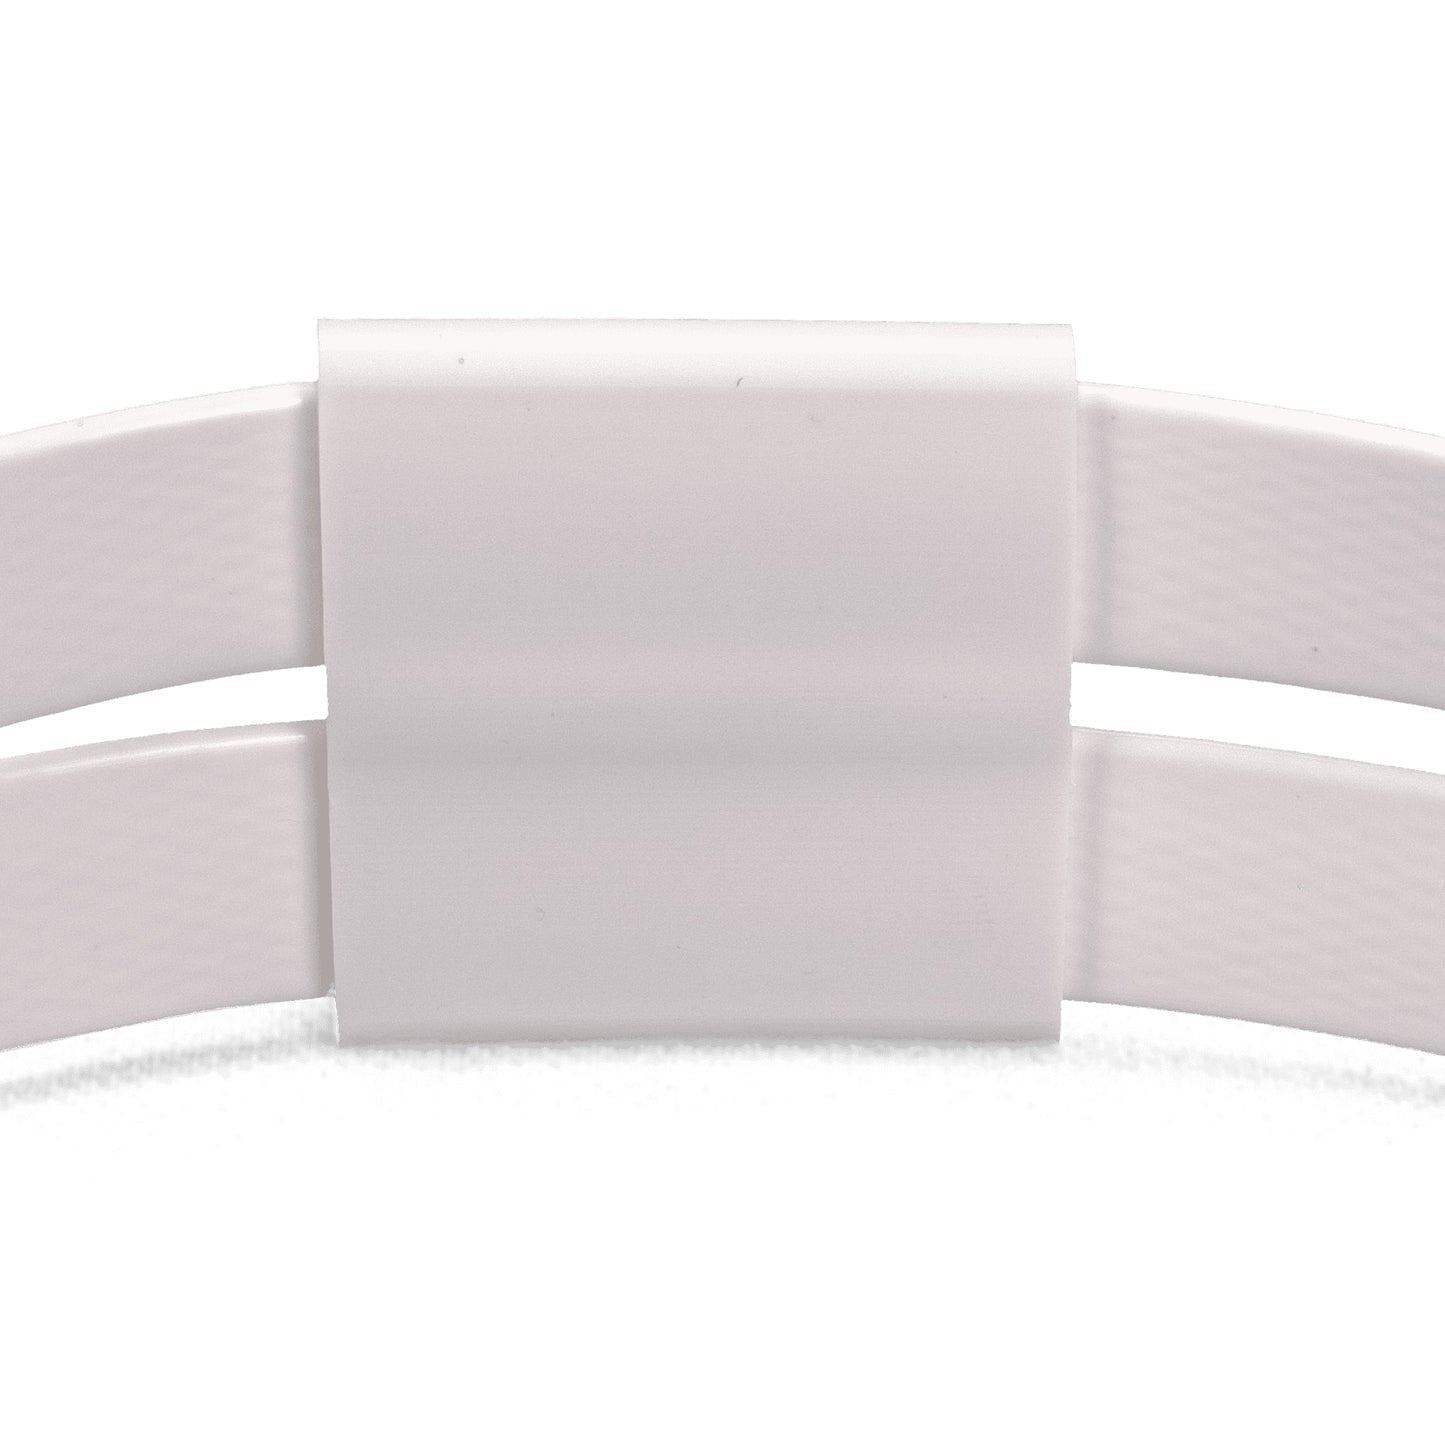 Signature Headgear Two-Strap Holders HG2S